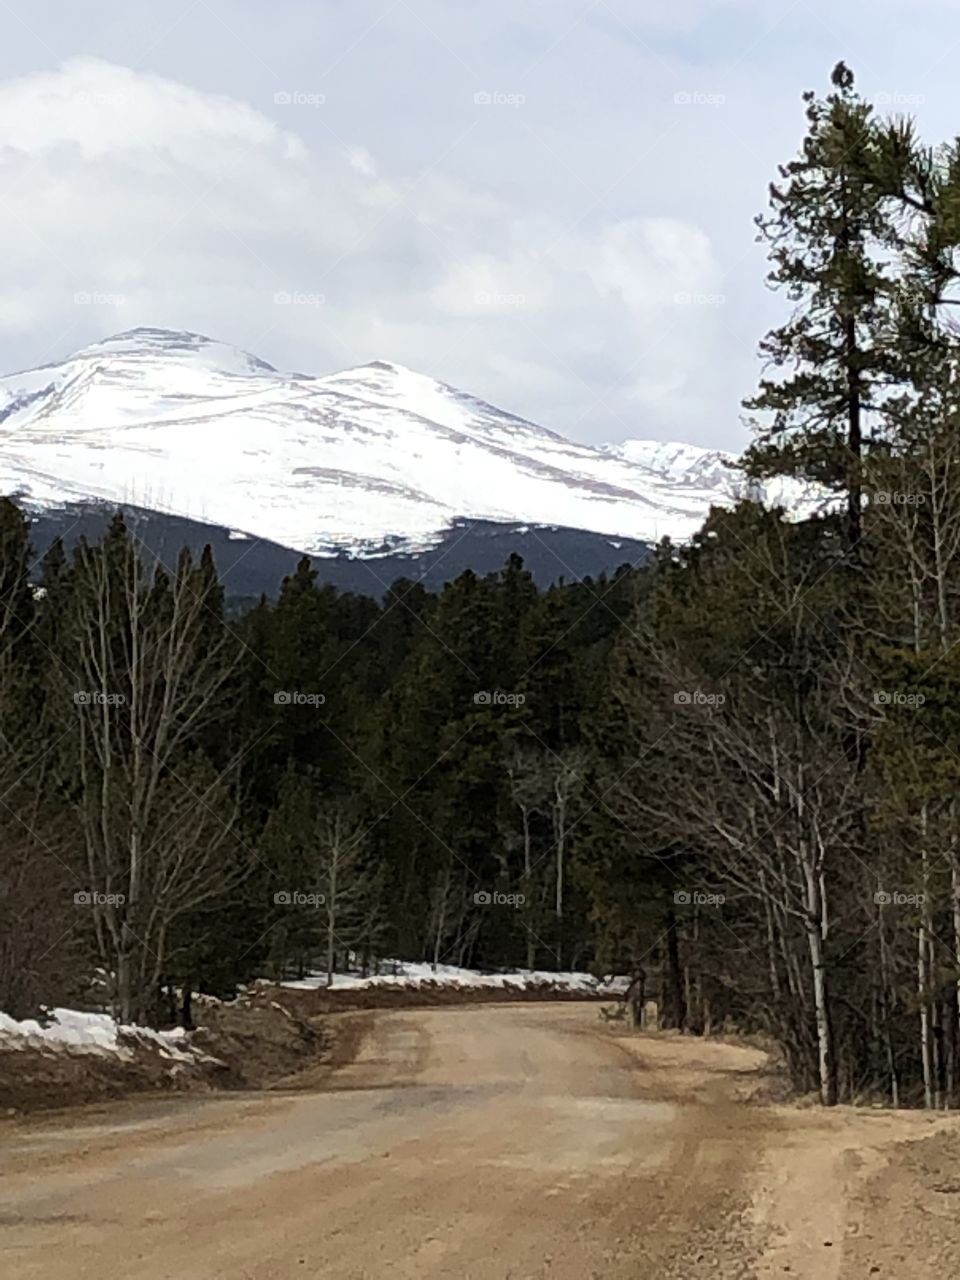 Road leading towards snowcappped mts above the pines near Ward, CO.